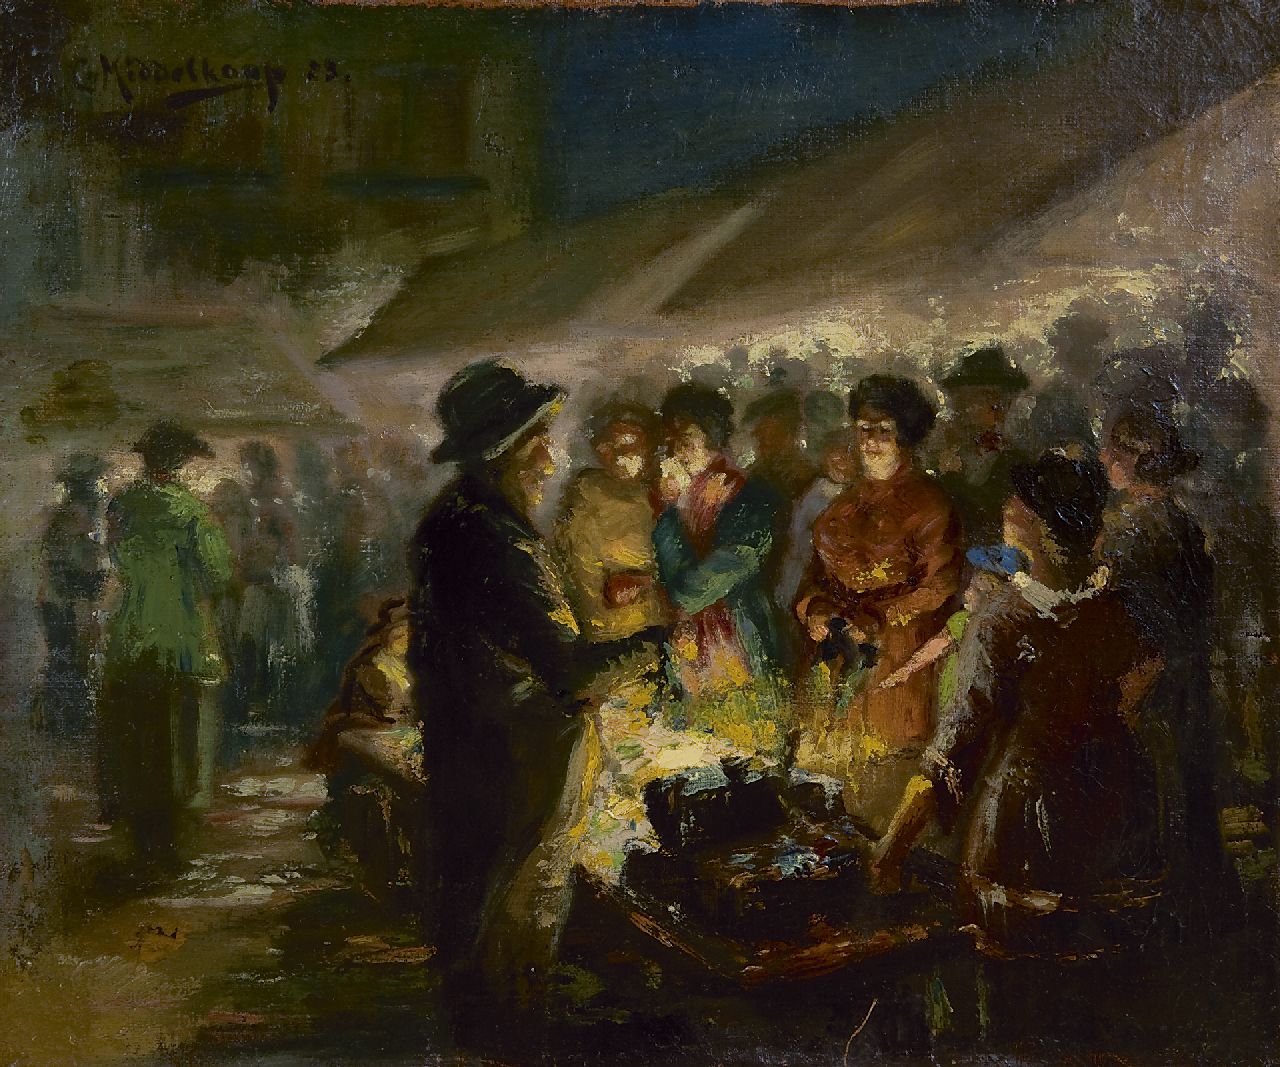 Middelkoop C.H.L.  | Cornelis Helenis Lodewijk Middelkoop | Paintings offered for sale | Marketplace at night, oil on canvas 33.0 x 39.9 cm, signed u.l. and dated '23